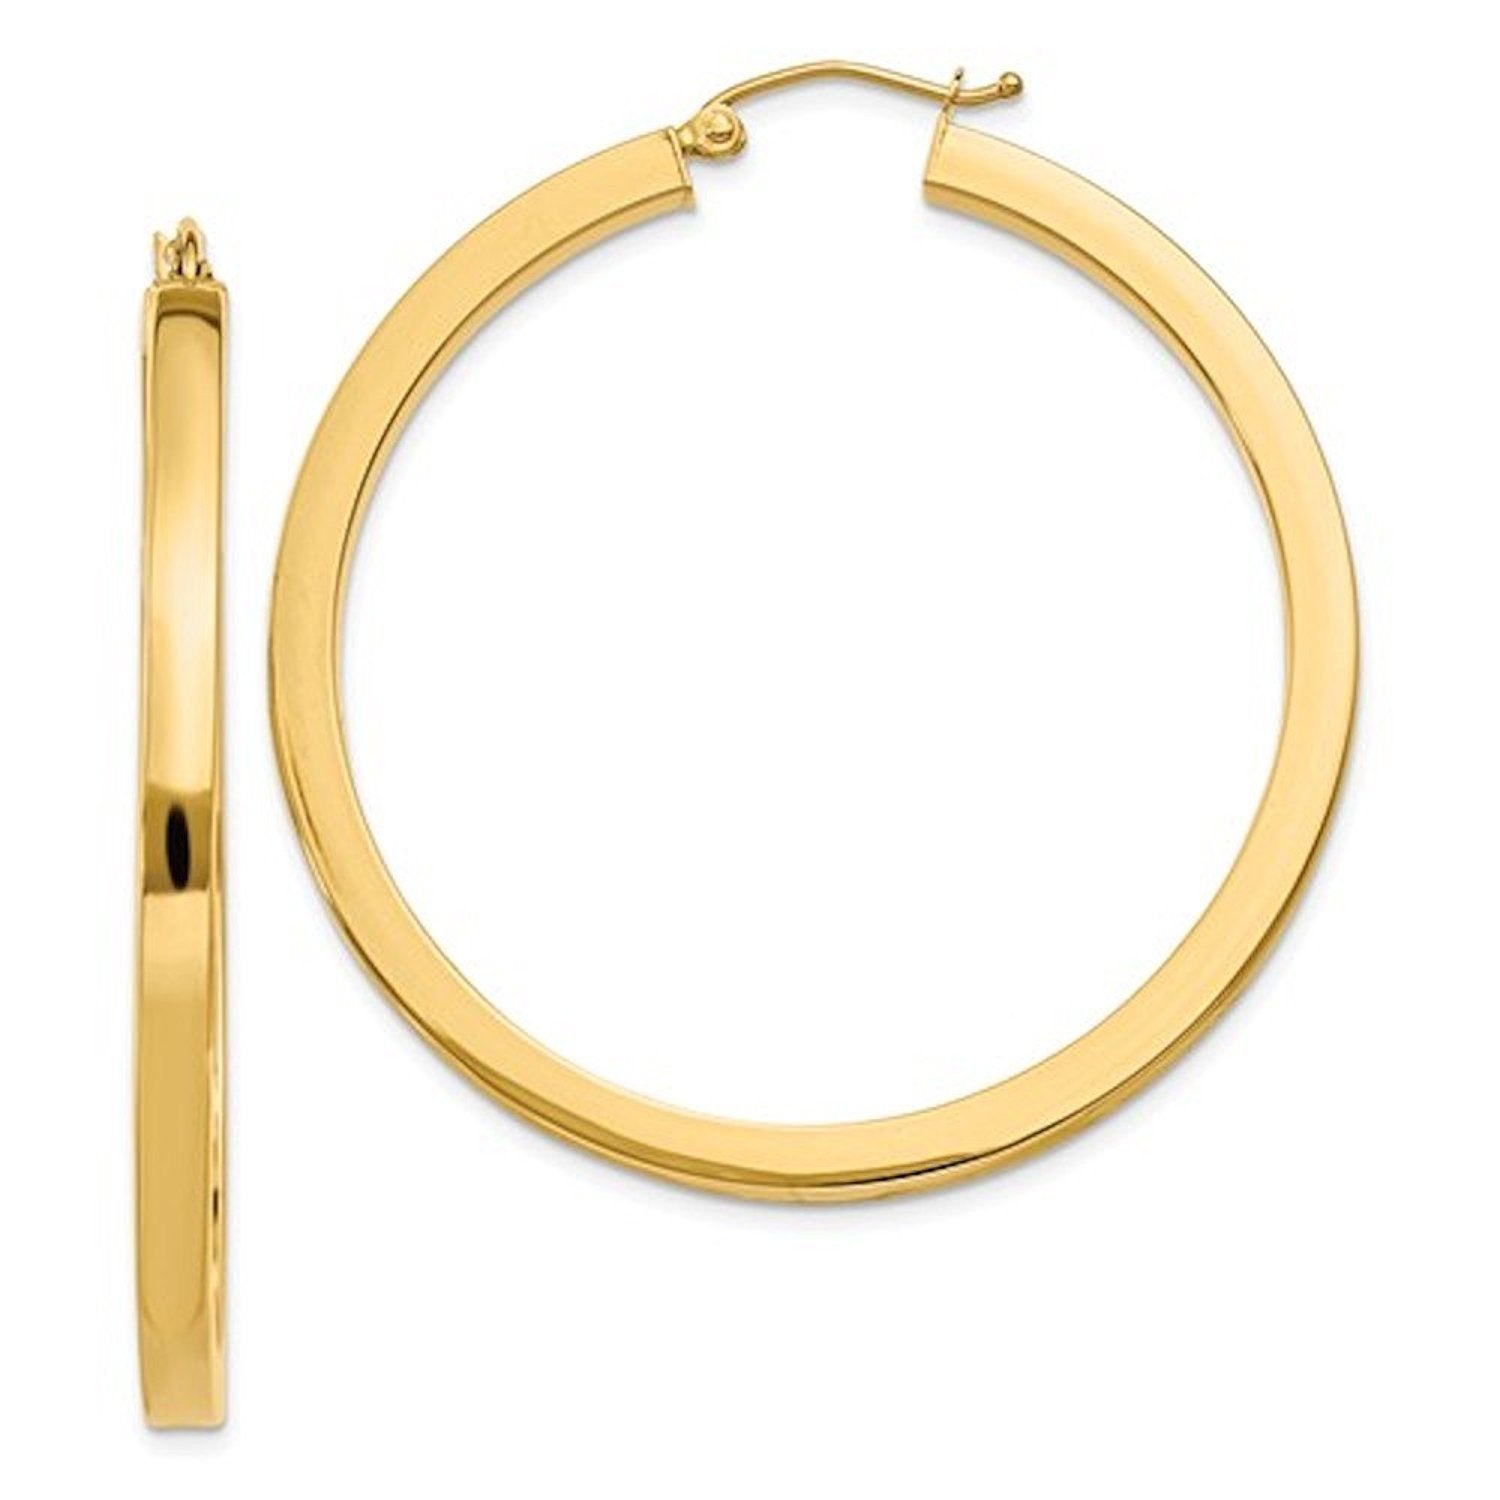 14K Yellow Gold Square Tube Round Hoop Earrings 45mm x 3mm